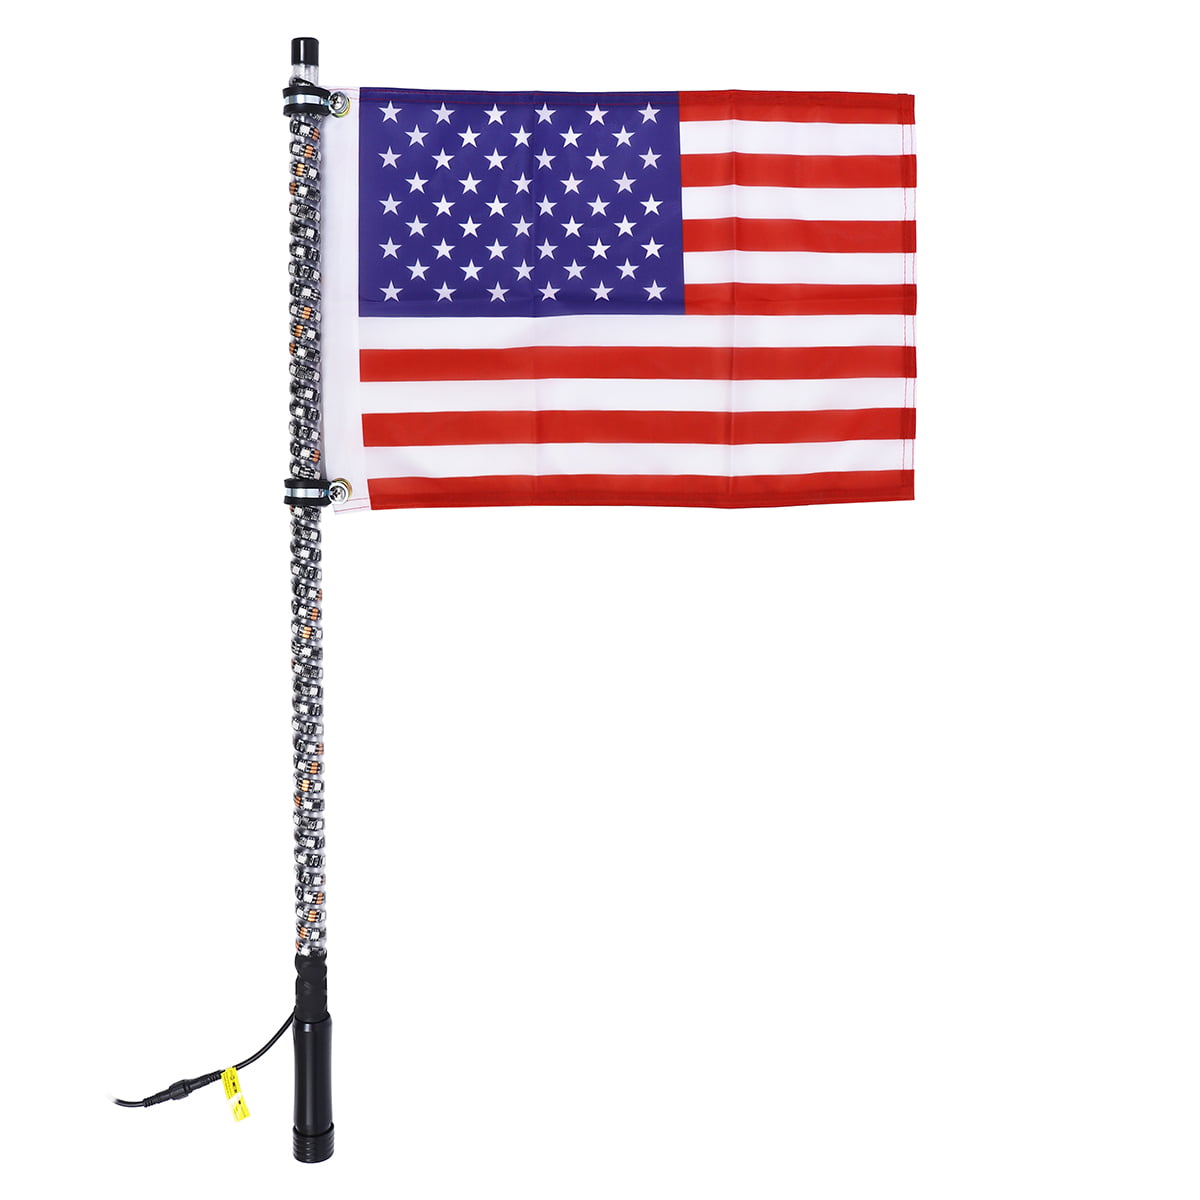 21 Modes Waterproof Lighted Whips Antenna Flag Pole for UTV ATV Polaris RZR 4 Wheeler Offroad Jeep Can-am Maverick X3 Yamaha Sand Dune Buggy 4X4 Truck Quad 20 Color RGB GTP 6ft LED Whip Lights 